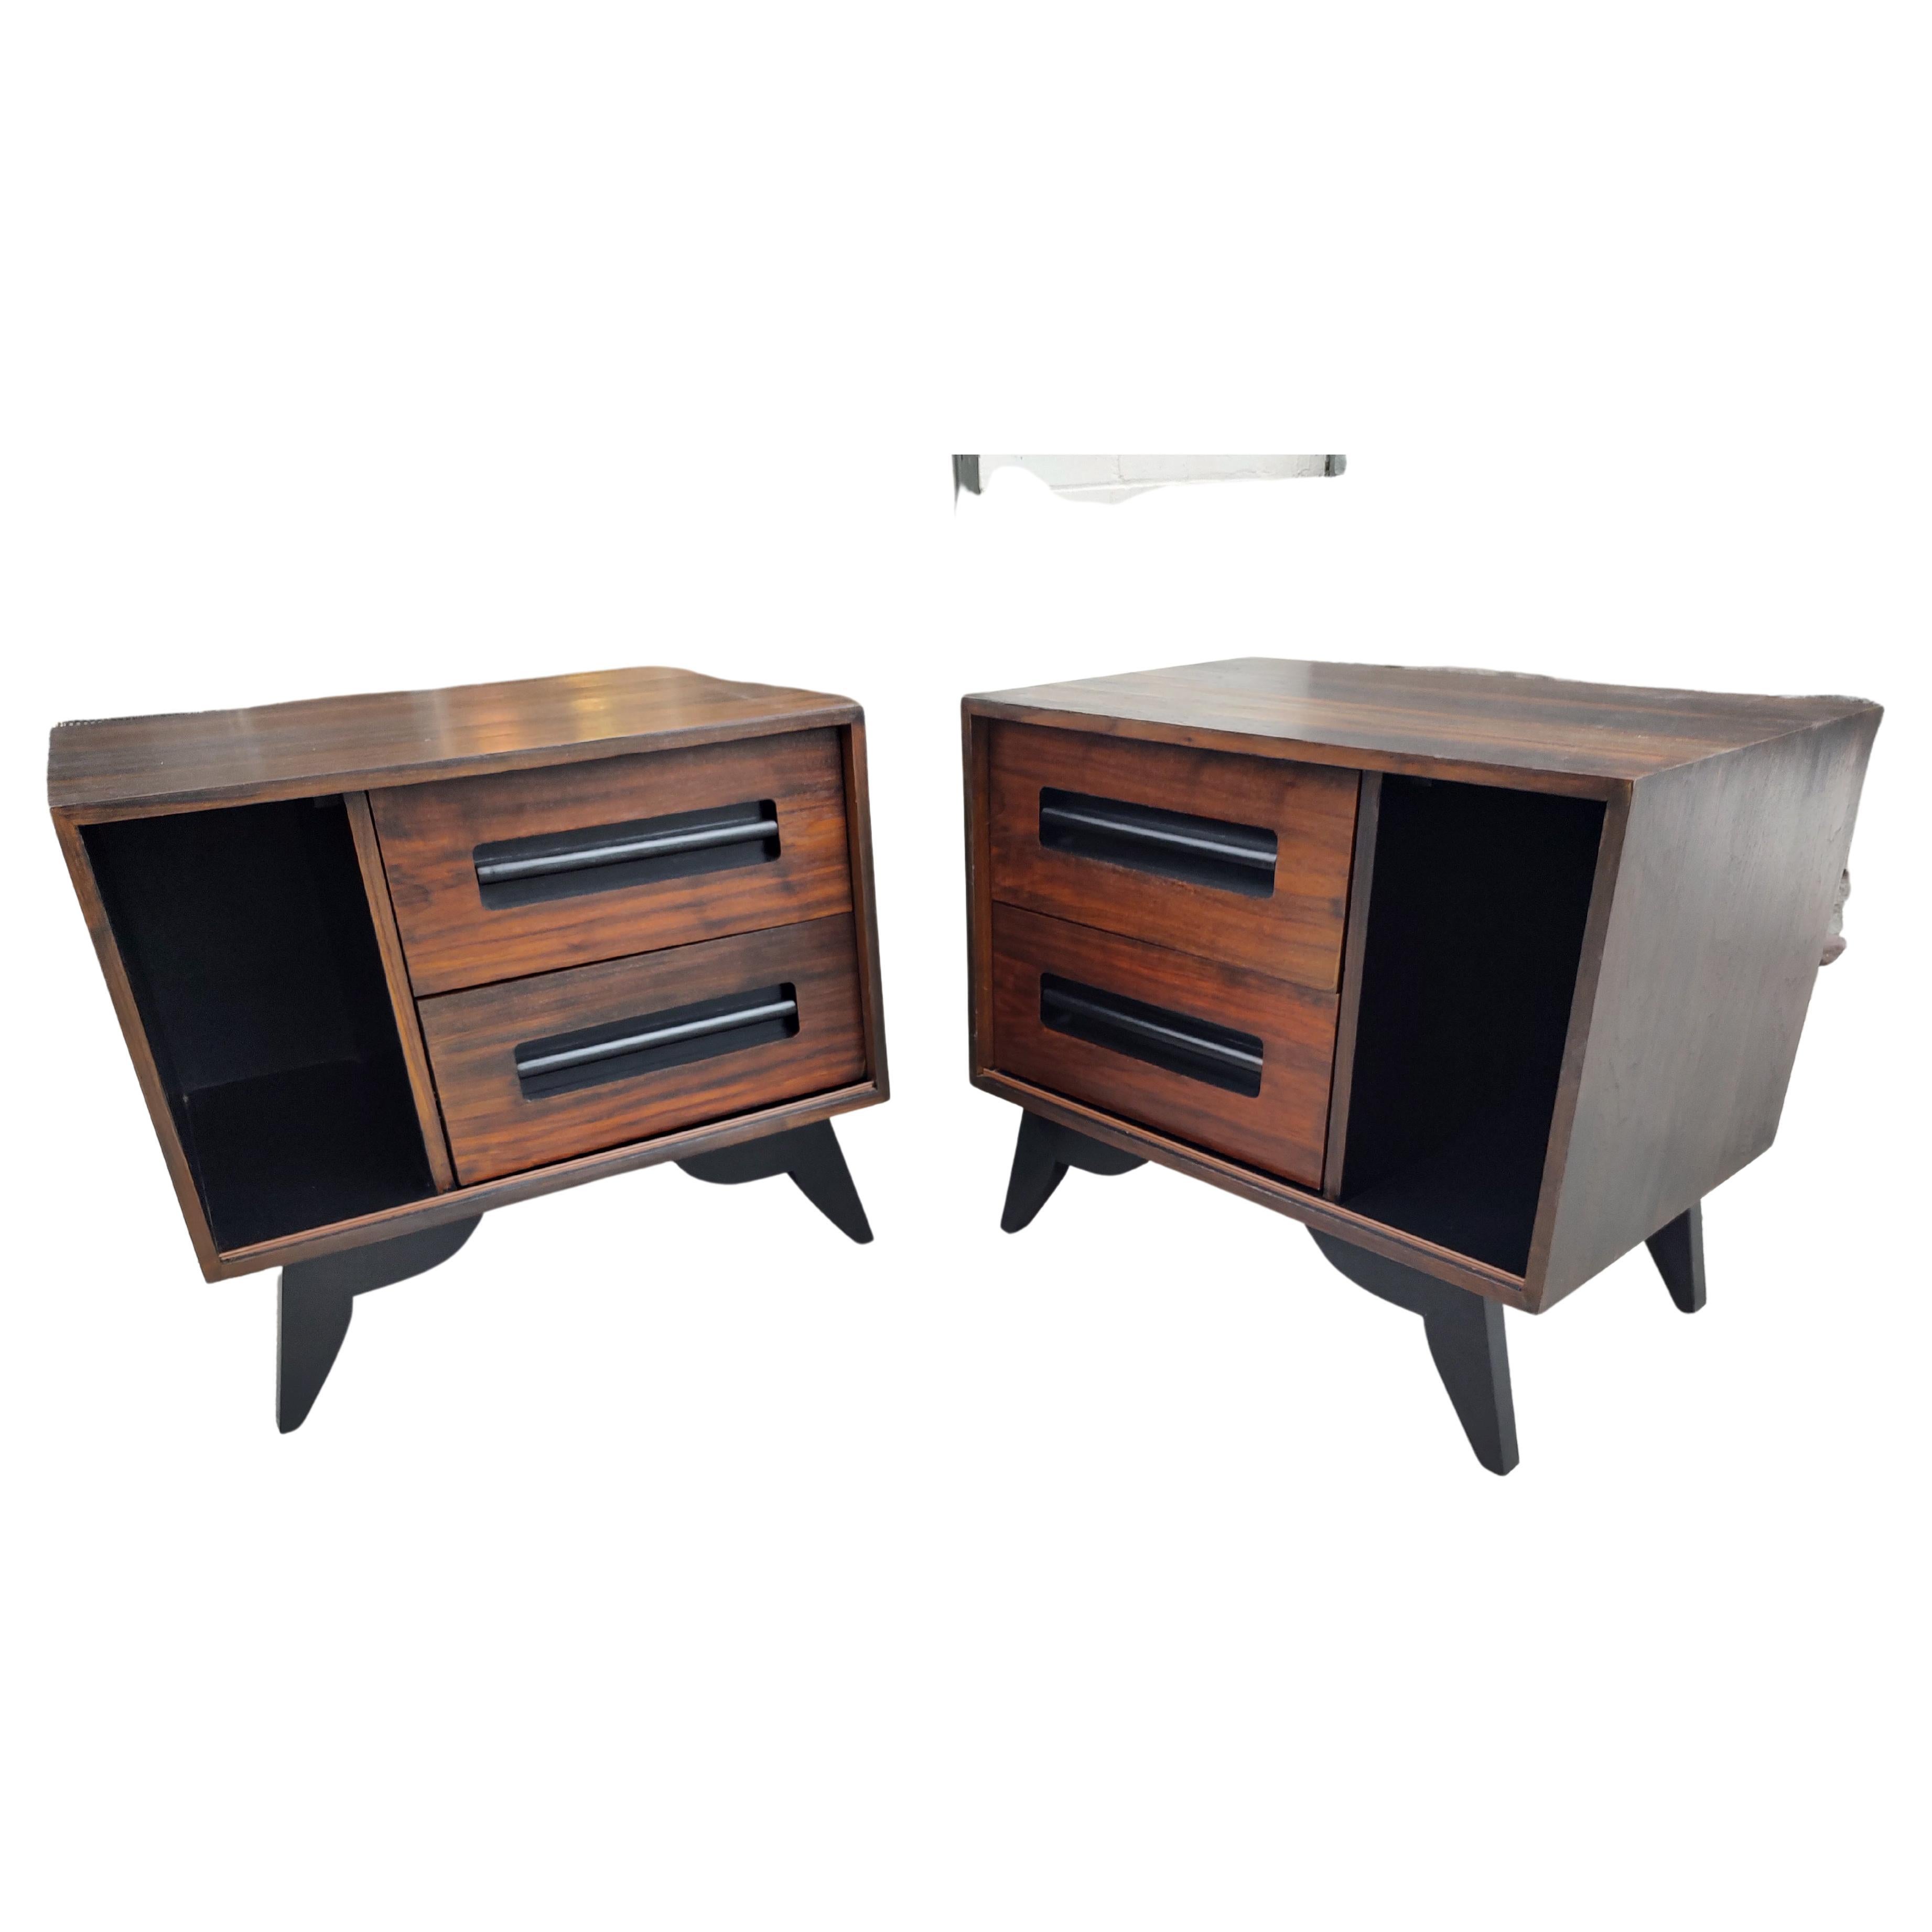 Pair of Mid-Century Modern Danish Rosewood & Black Lacquer Nightstands C1970 For Sale